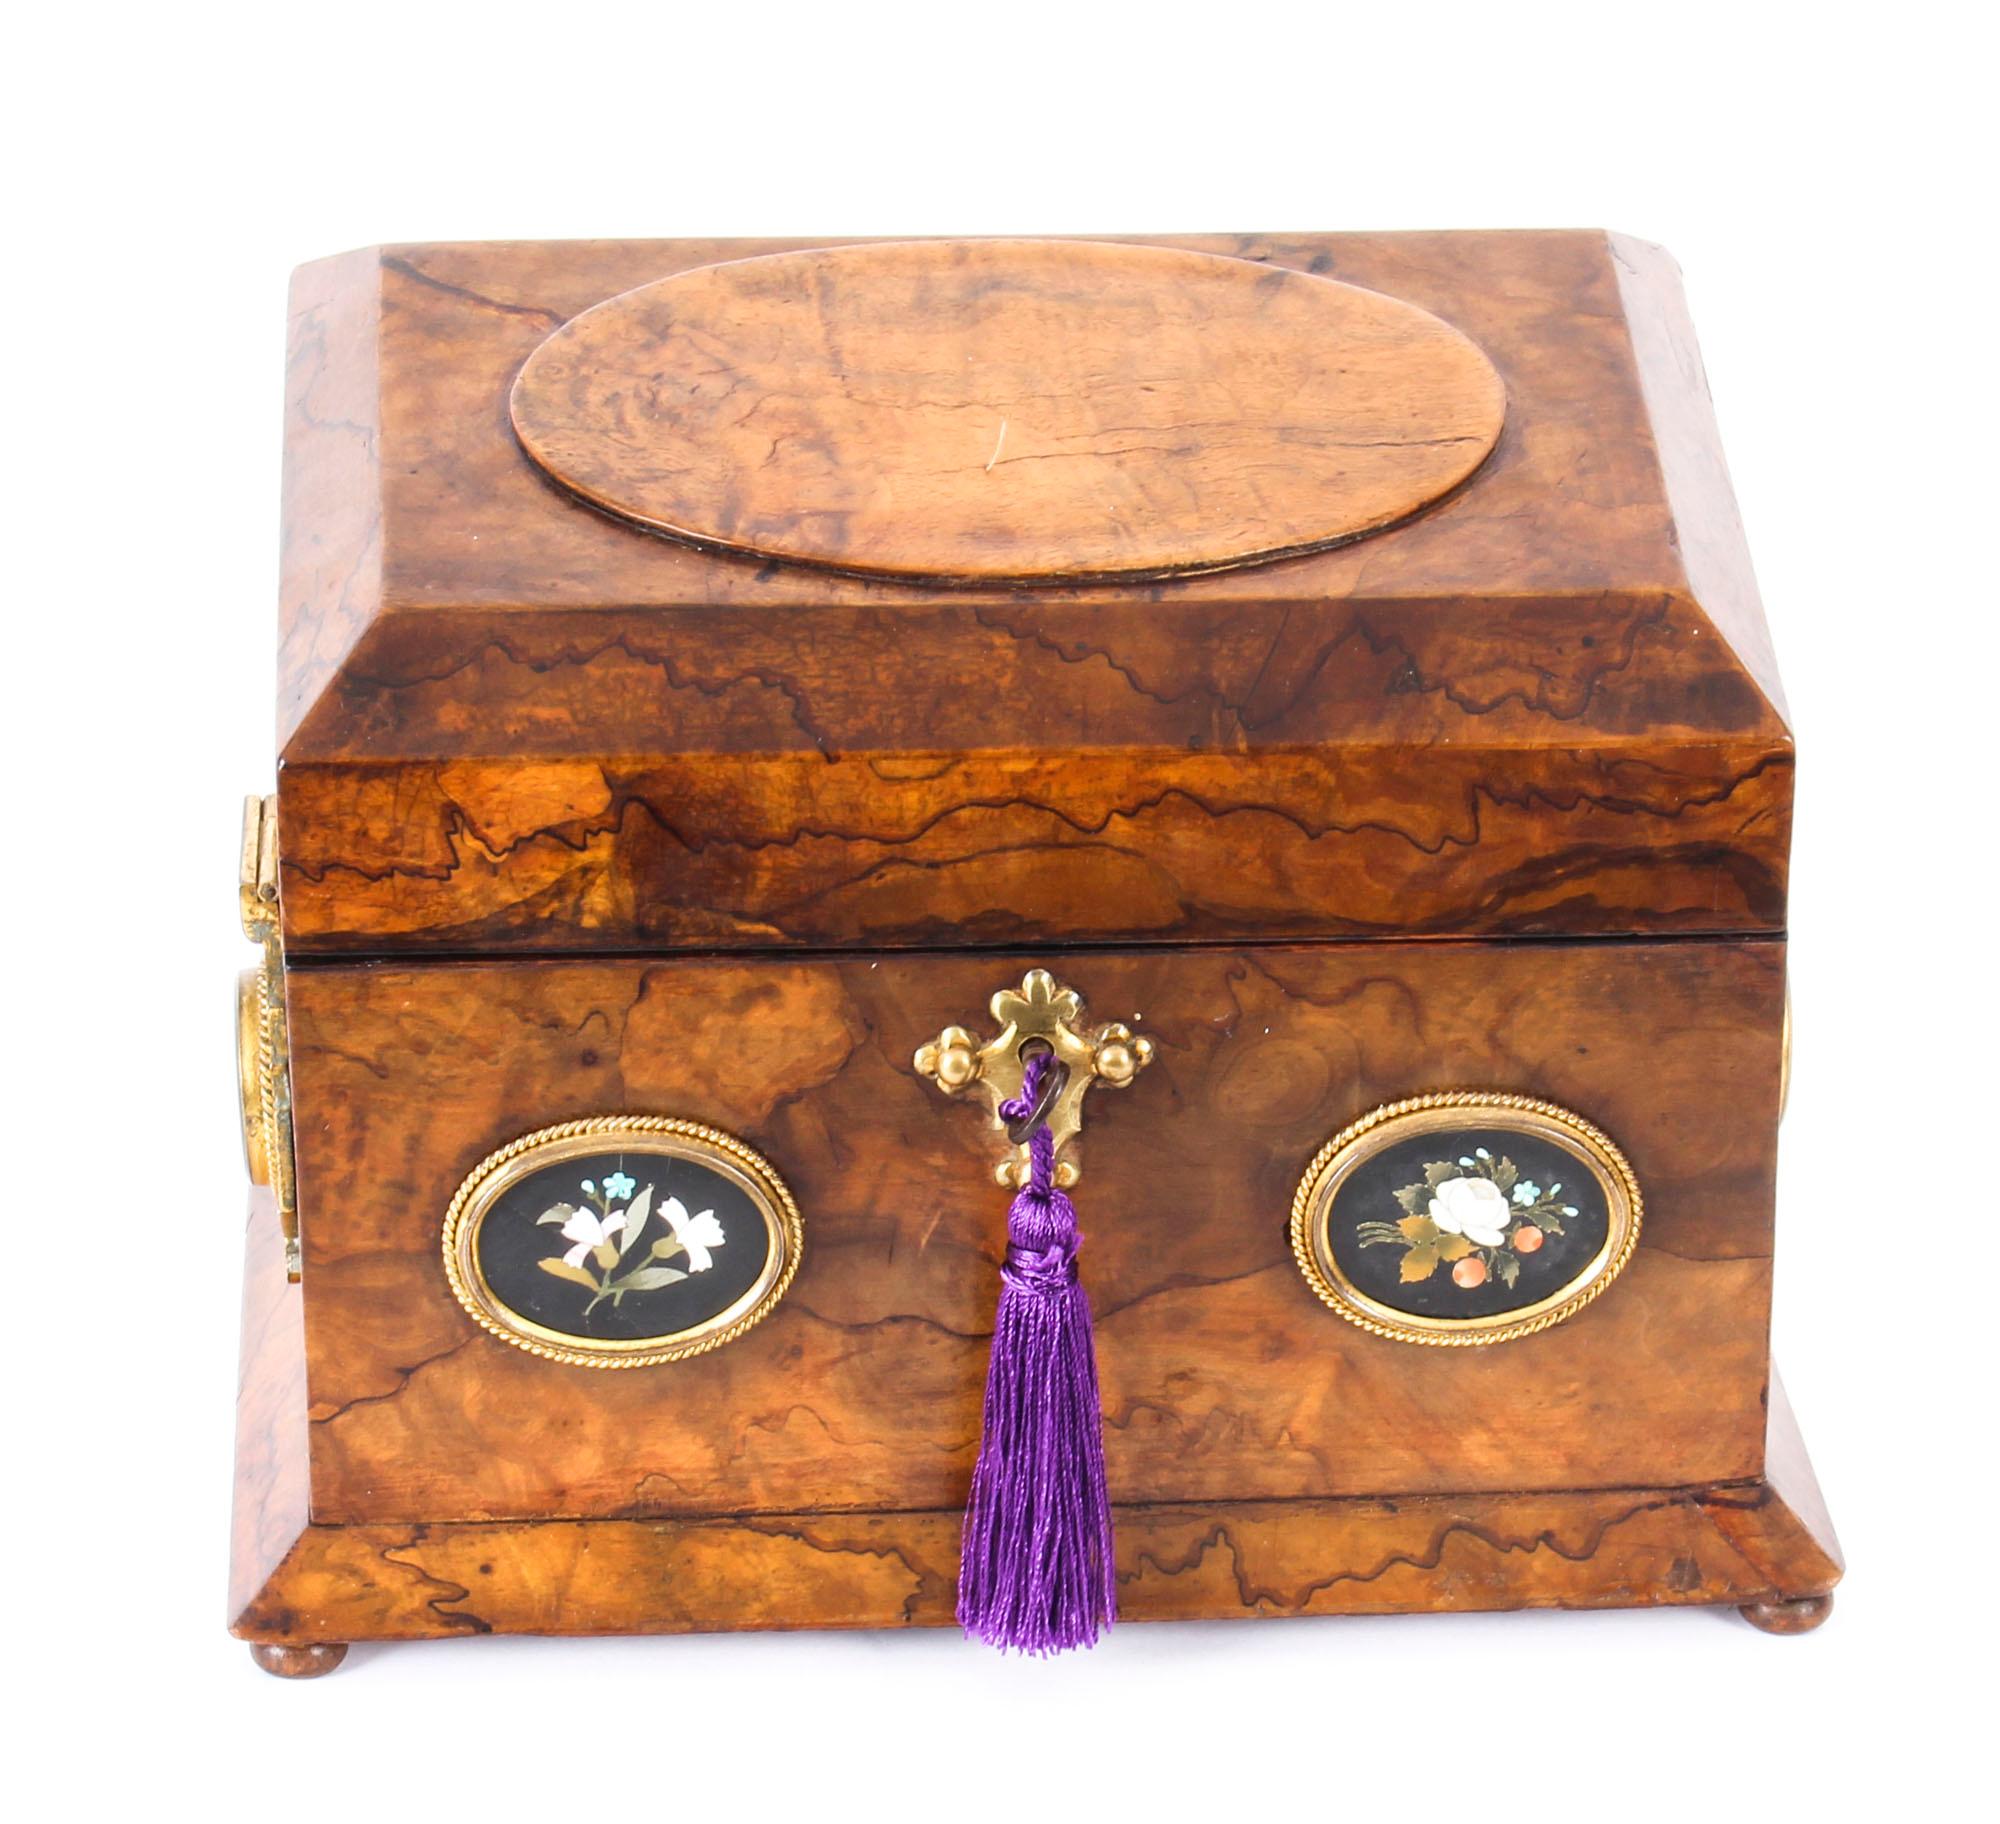 This is a wonderful antique Victorian burr walnut and Pietra Dura stationery casket, circa 1860 in date. 

This stunning high-quality casket is rectangular in shape and is made with the finest burr walnut that has splendid figuring. It has two